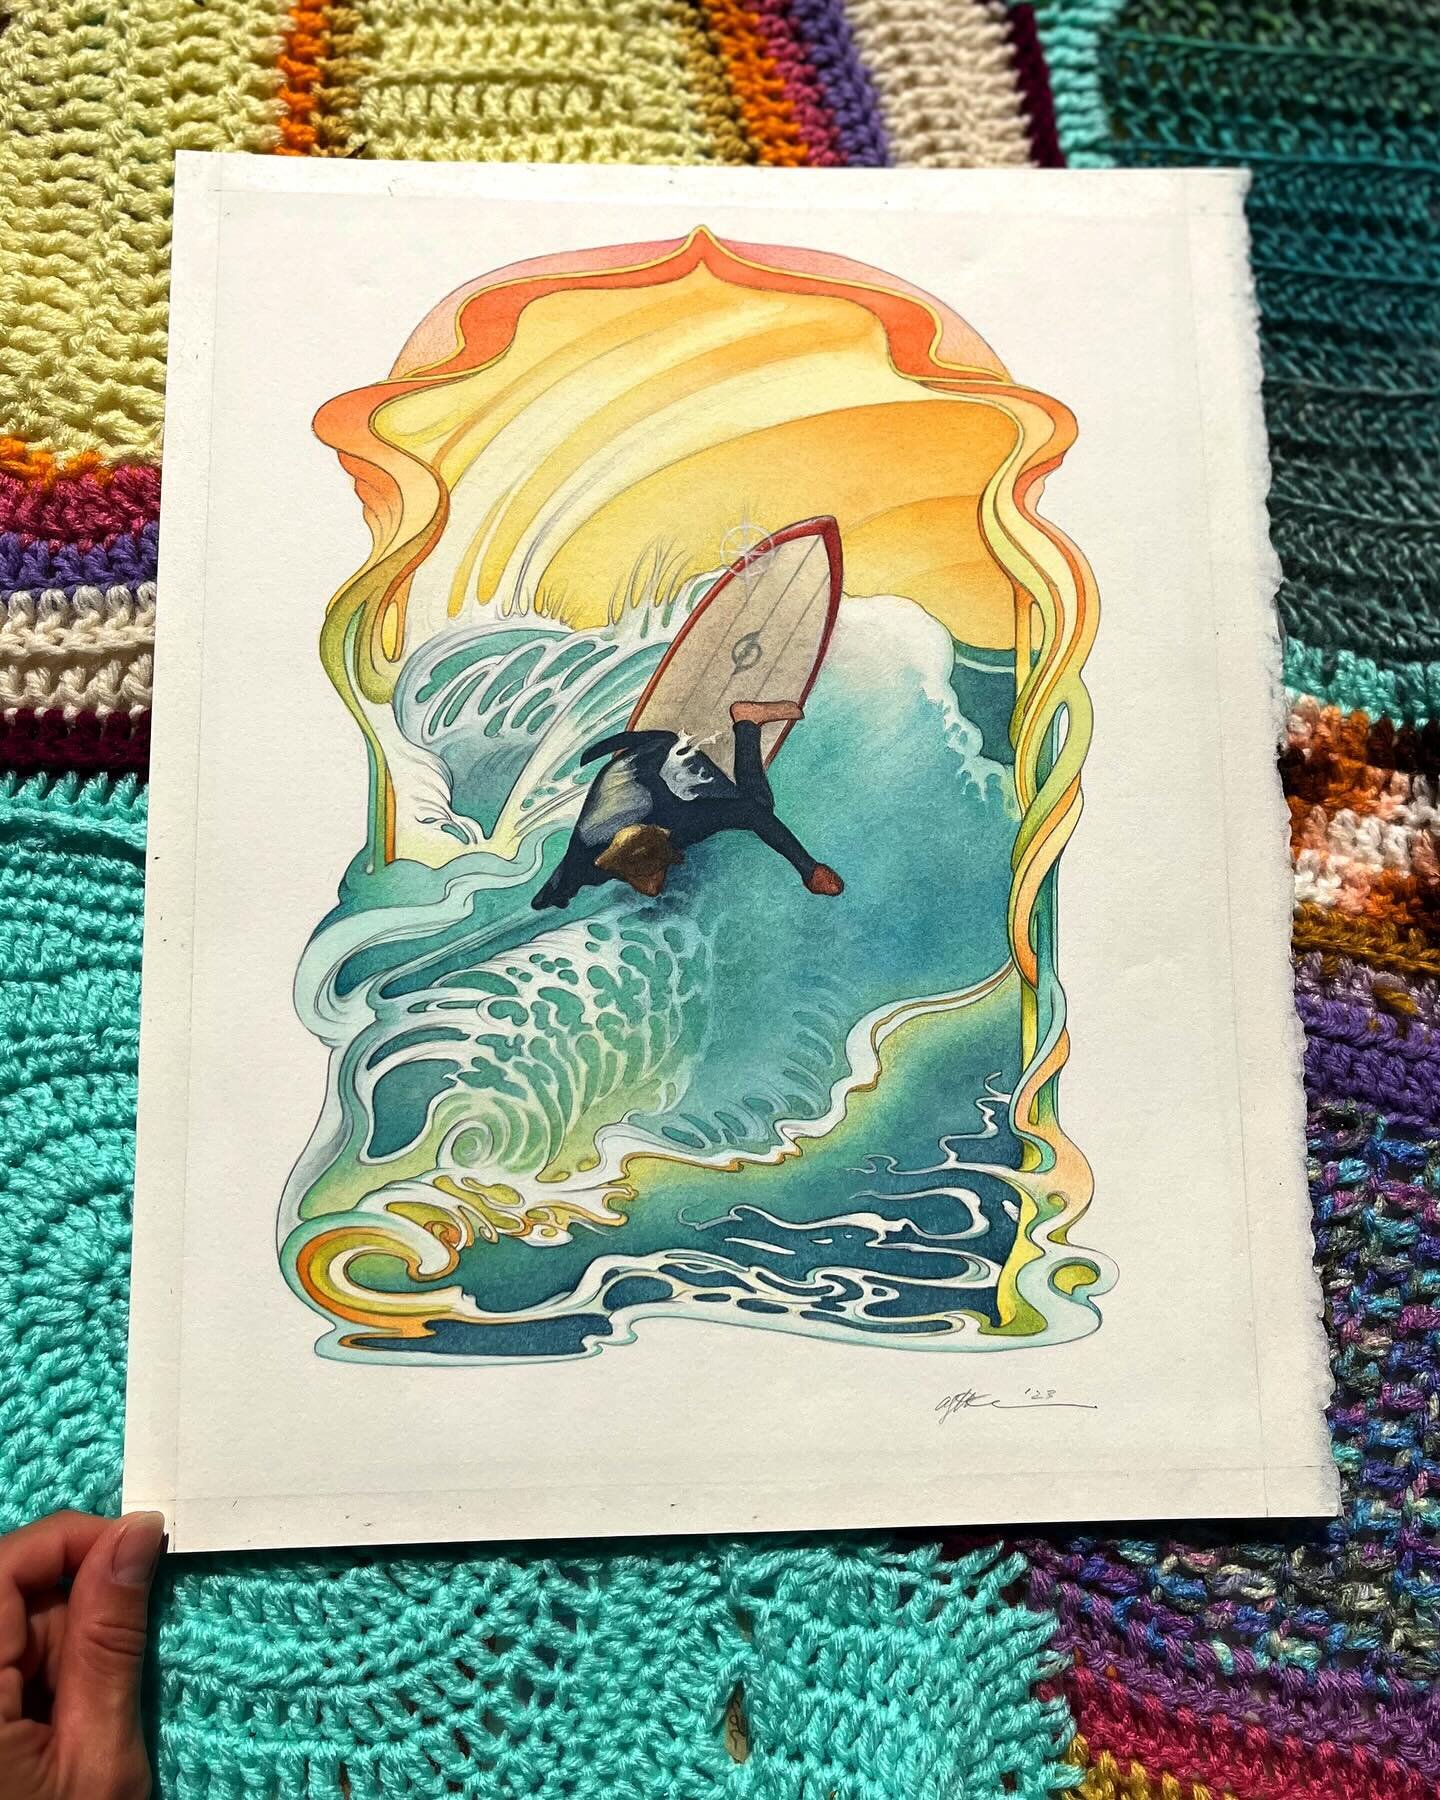 There are about 2-5 leftover prints of each of these @campbellbros inspired surf prints &mdash;- and available now on my site (shipping from CA).

The originals are for sale too- one is framed, the rest are not. I can ship any original within the nex